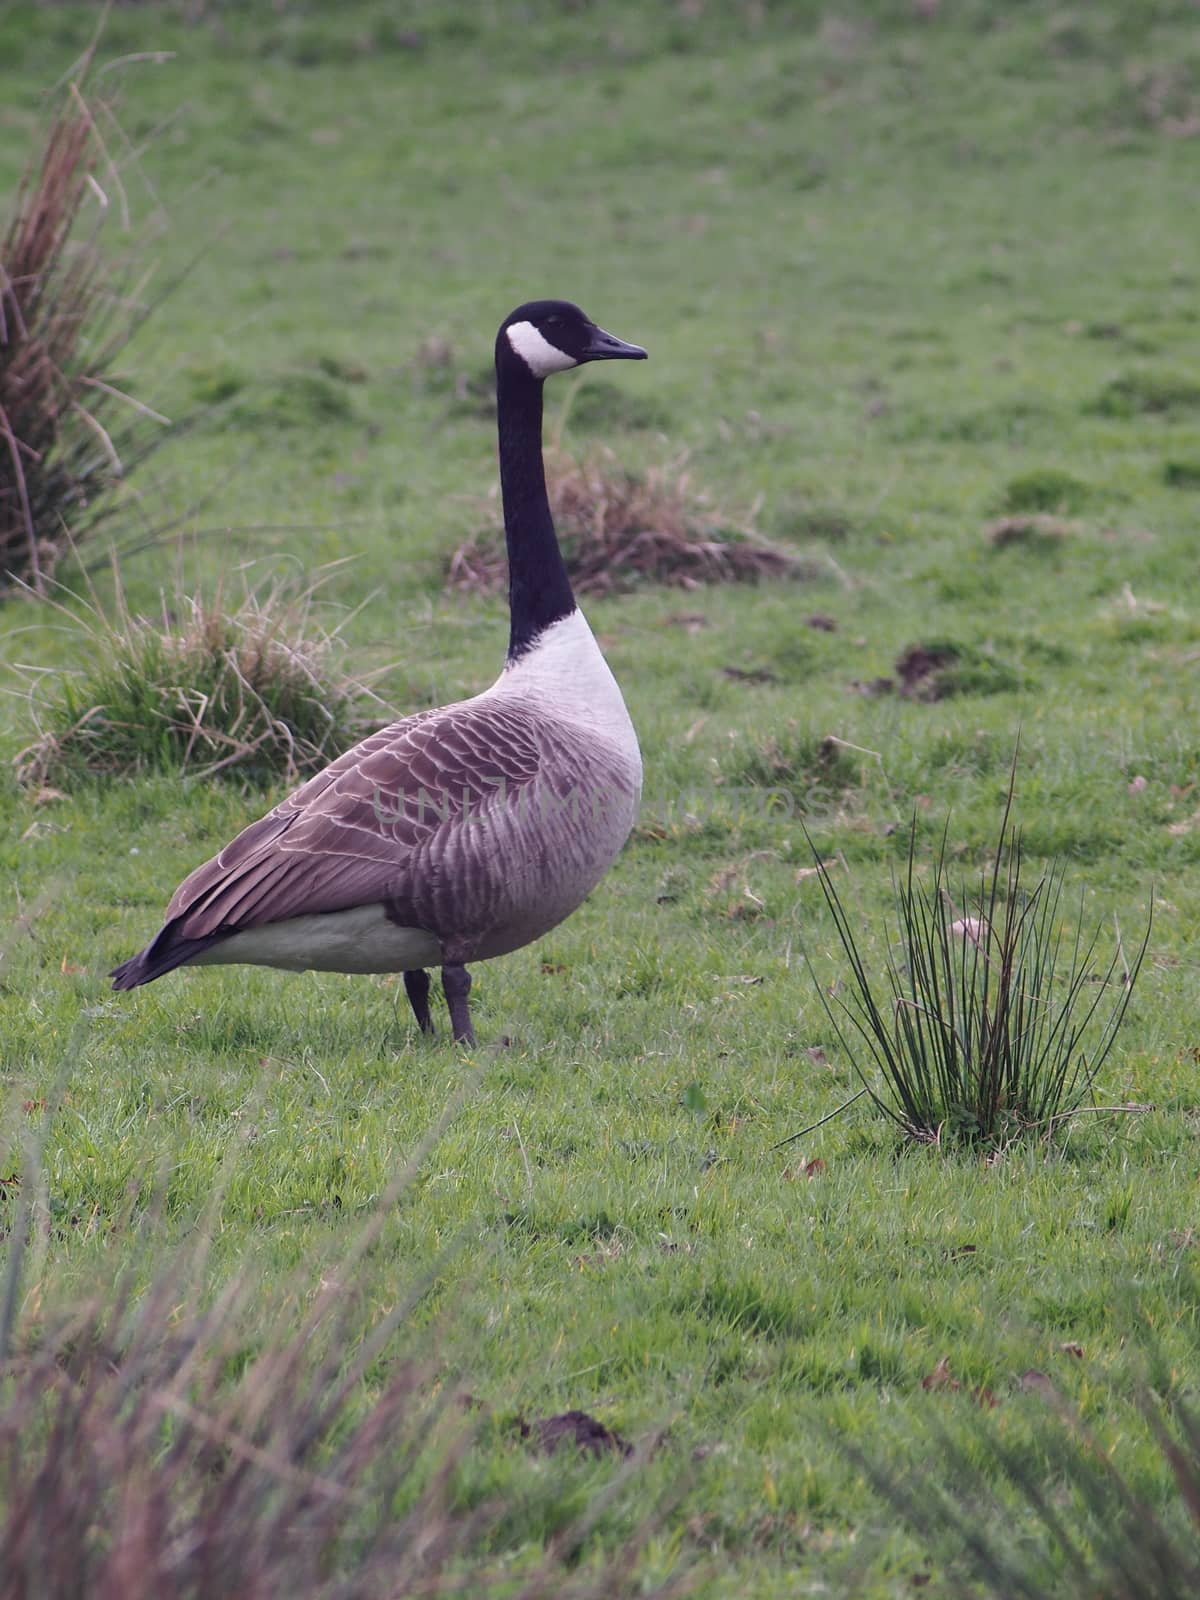 A wild Canada Goose with a distinctive black head and neck and white throat stands alert in a field